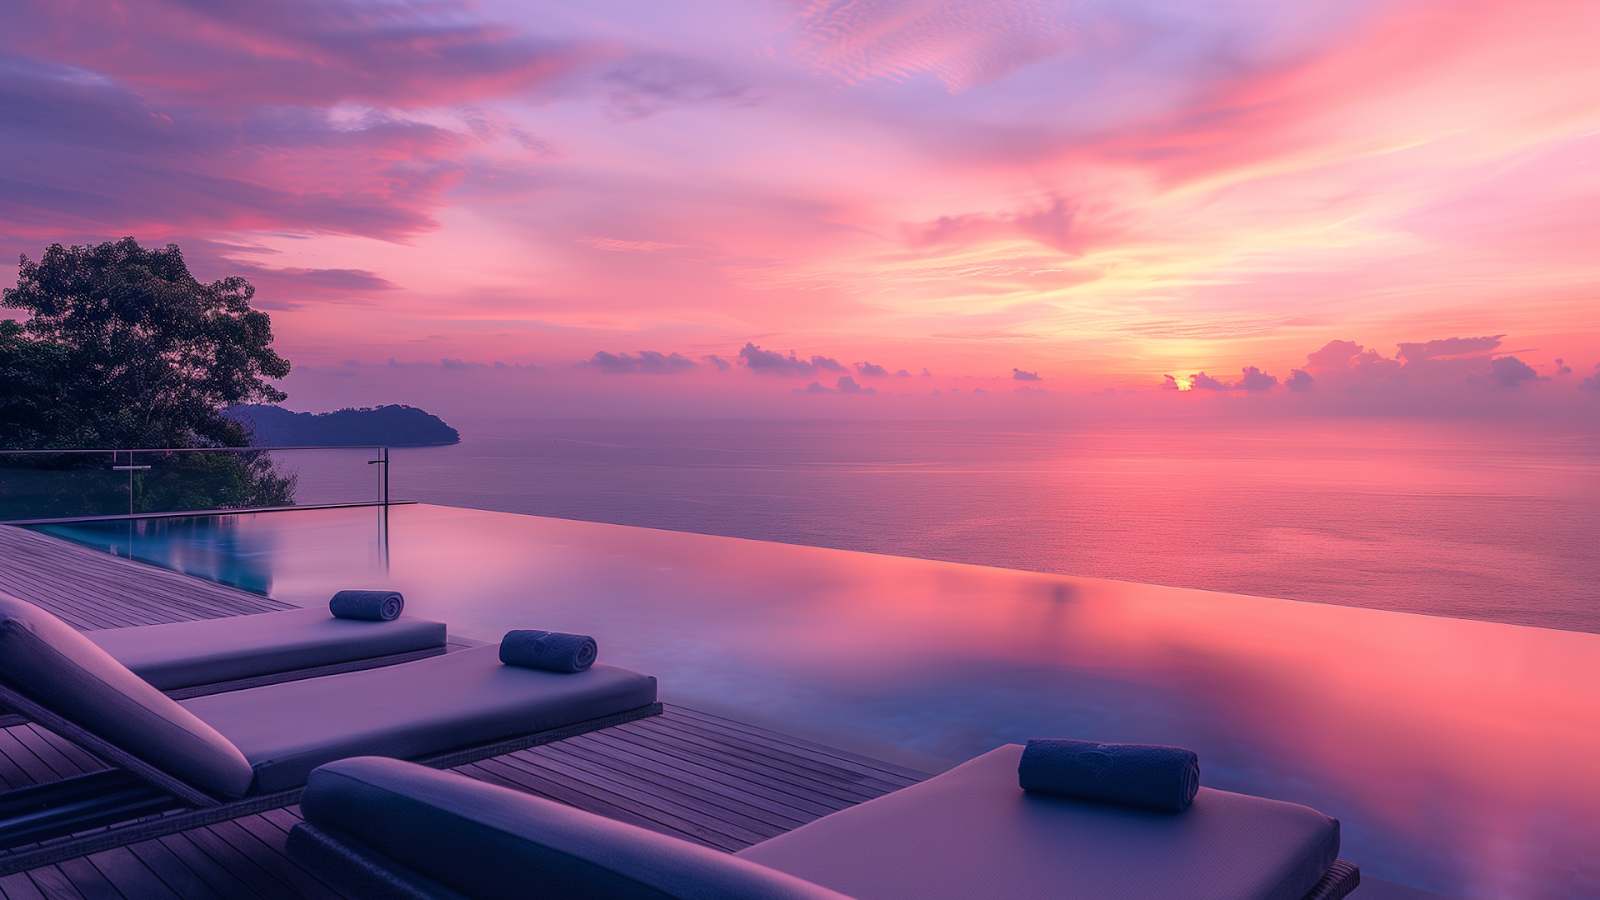 Early morning view of a luxury villa pool in Phuket, with the pool reflecting the colorful sunrise over the Andaman Sea.